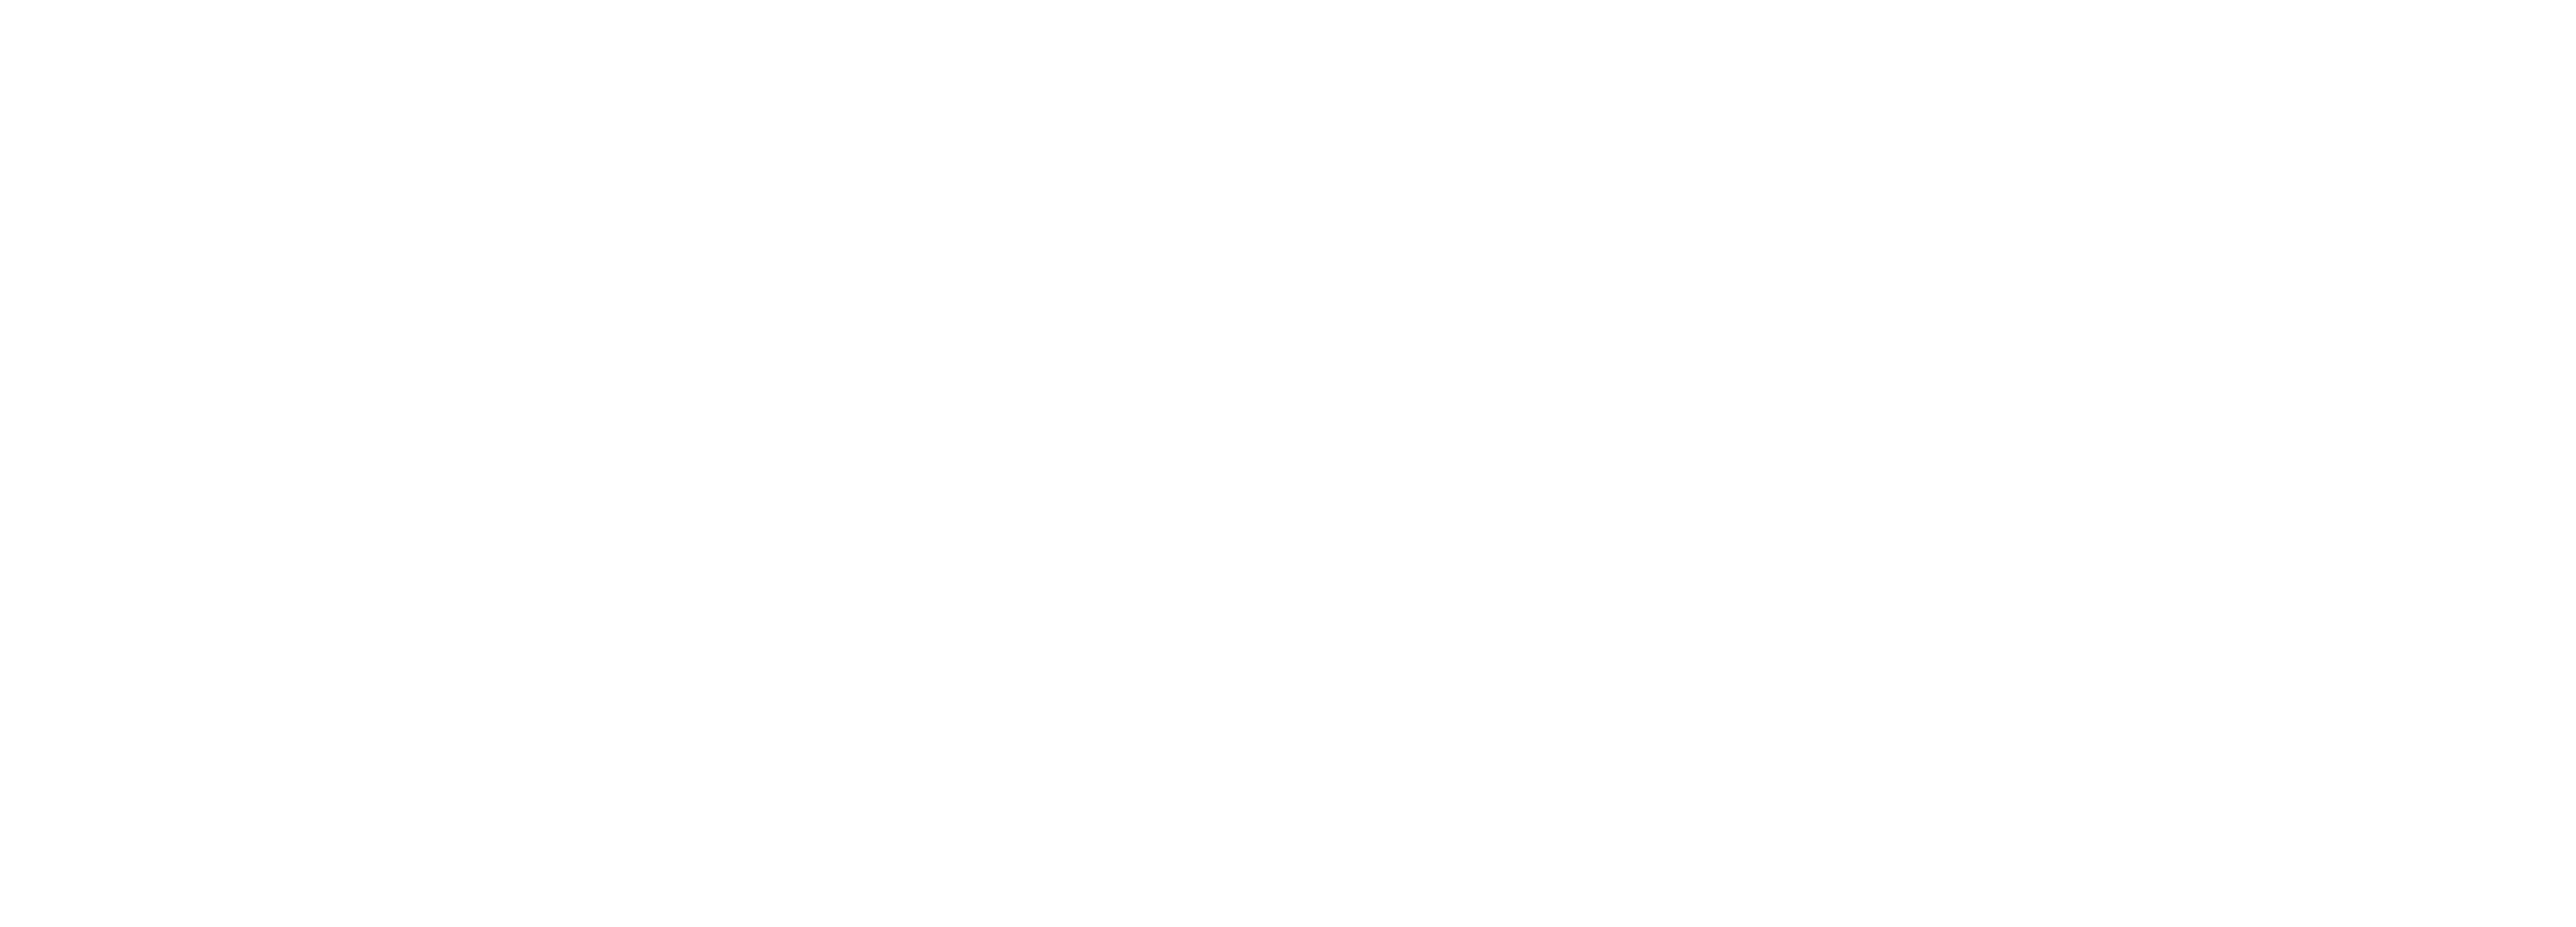 Rogue logo for jersey - White